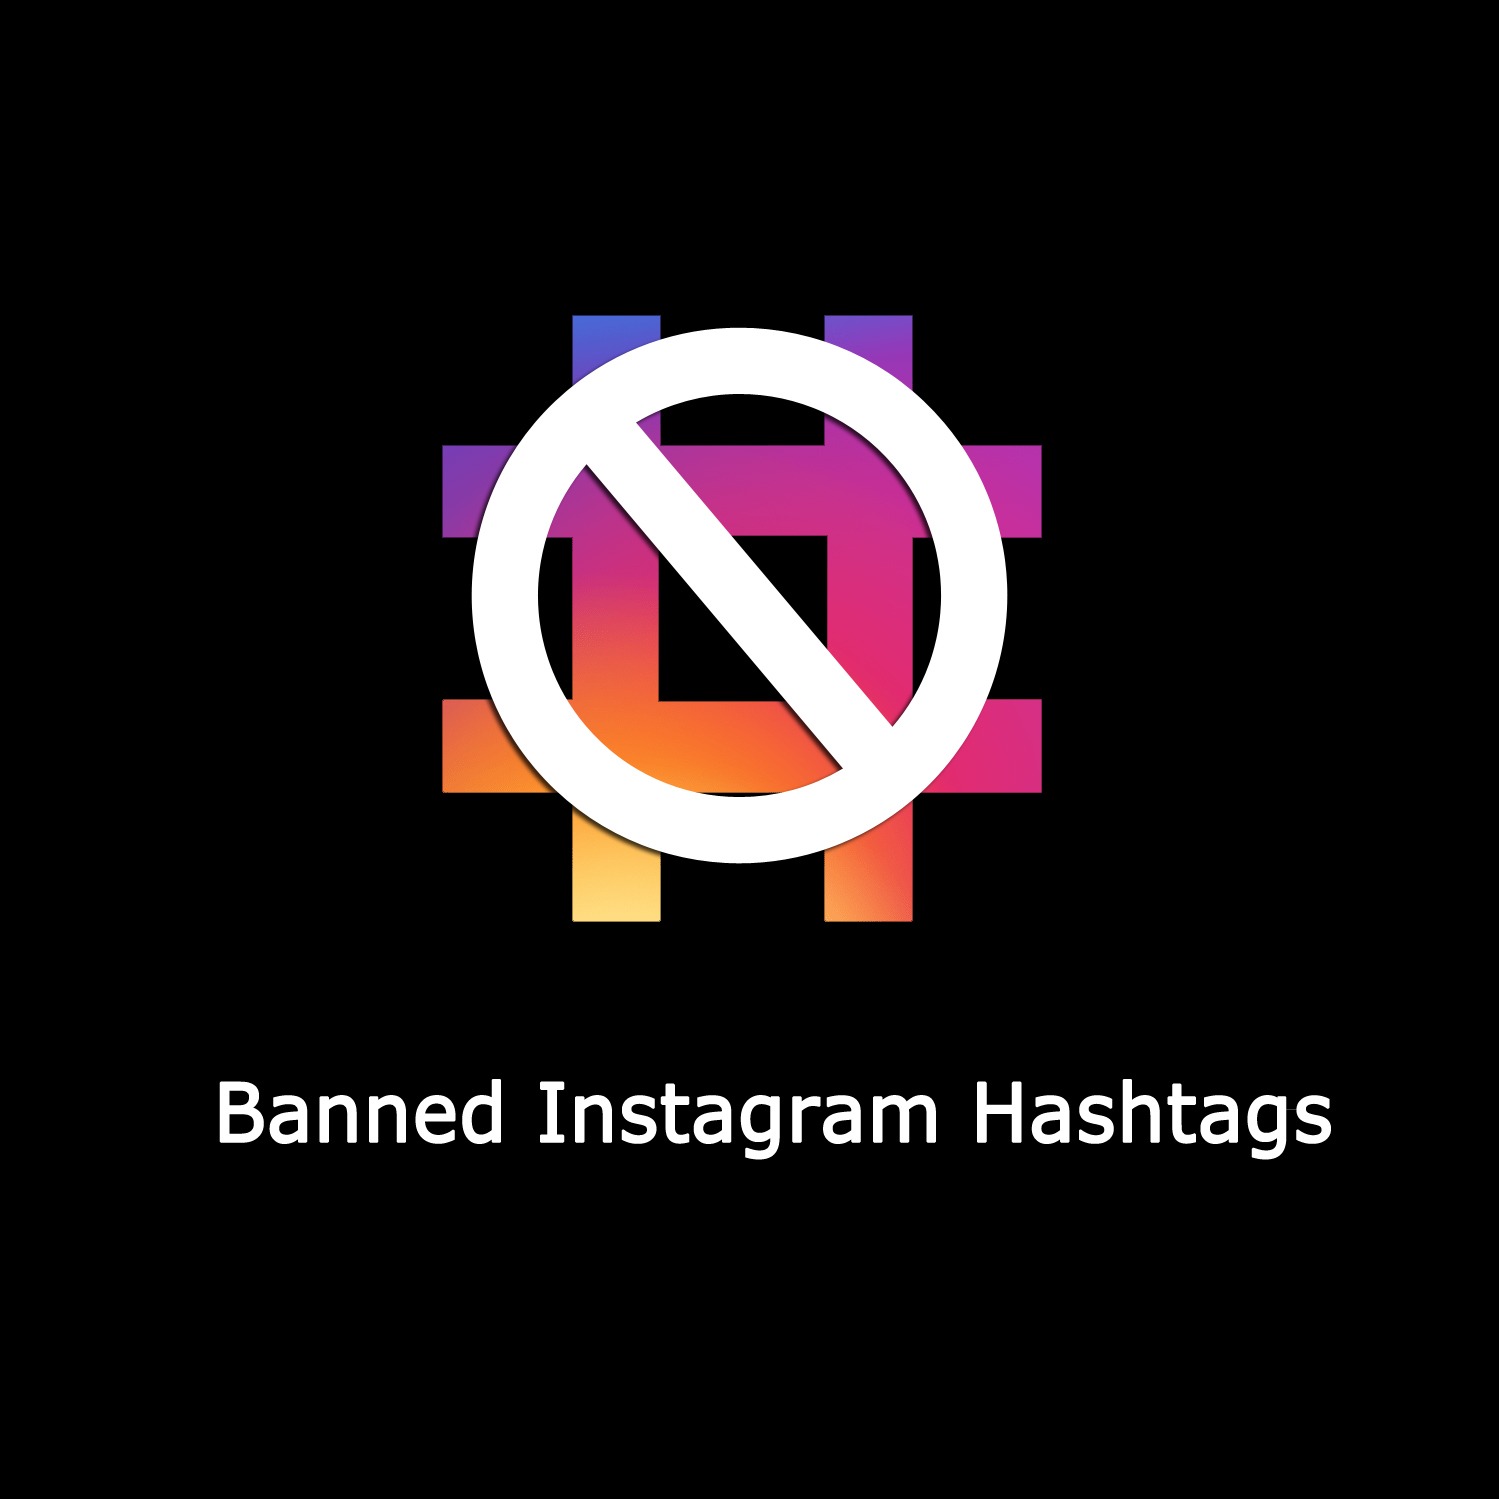 That Instagram #Hashtag You Are About To Use Has Probably been BANNED (See Full 2019 Banned List)